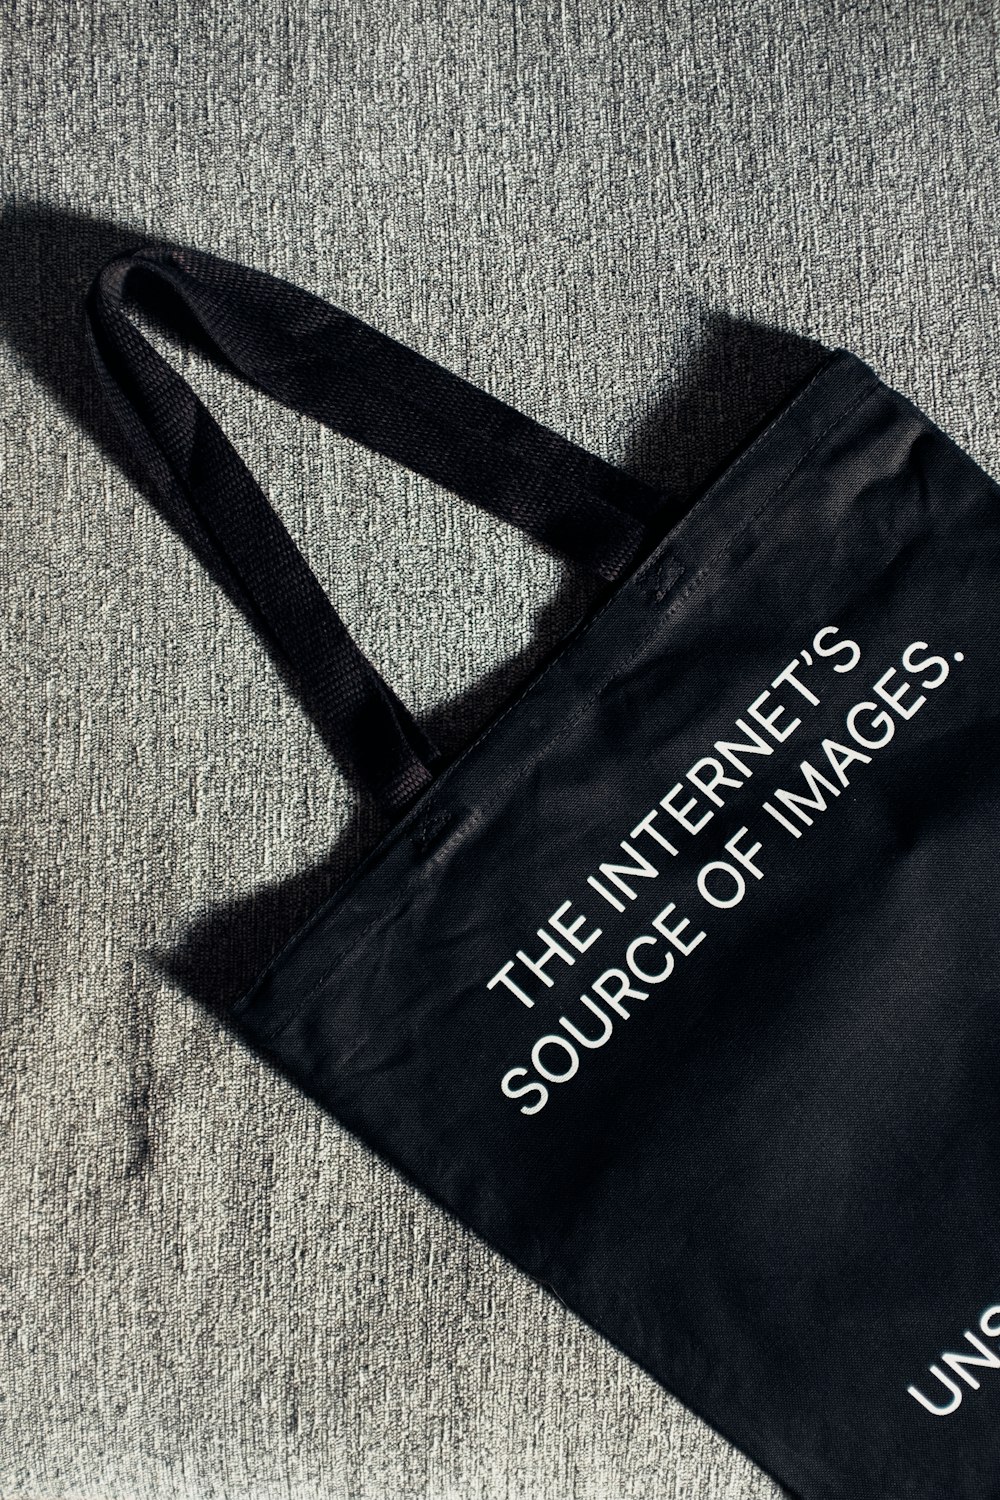 a black bag with the words the internet is source of images printed on it